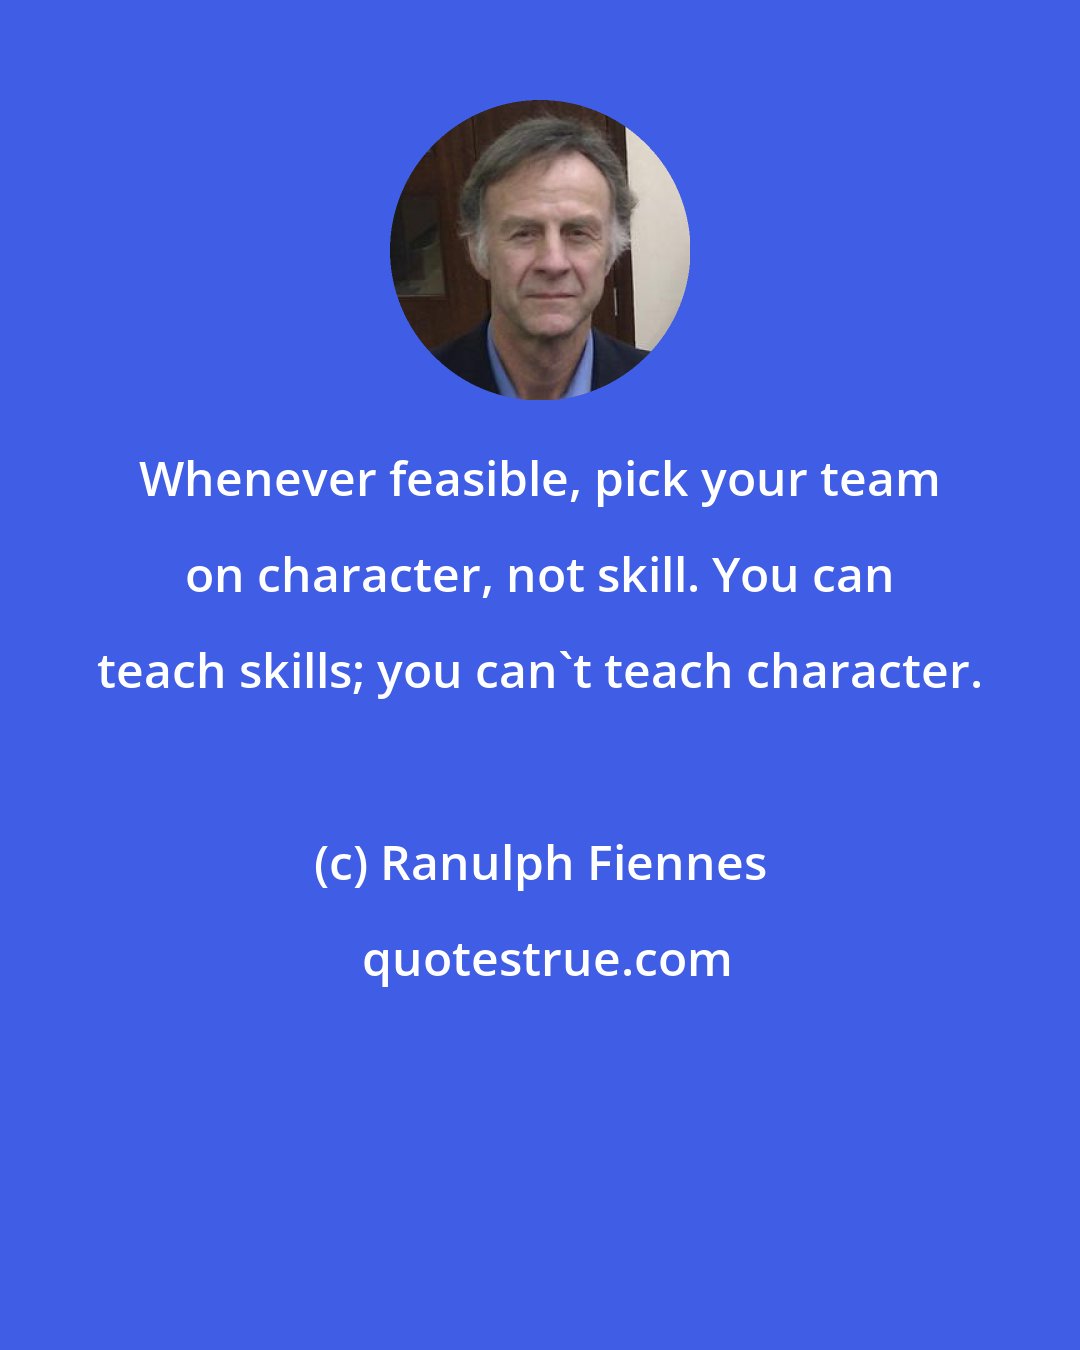 Ranulph Fiennes: Whenever feasible, pick your team on character, not skill. You can teach skills; you can't teach character.